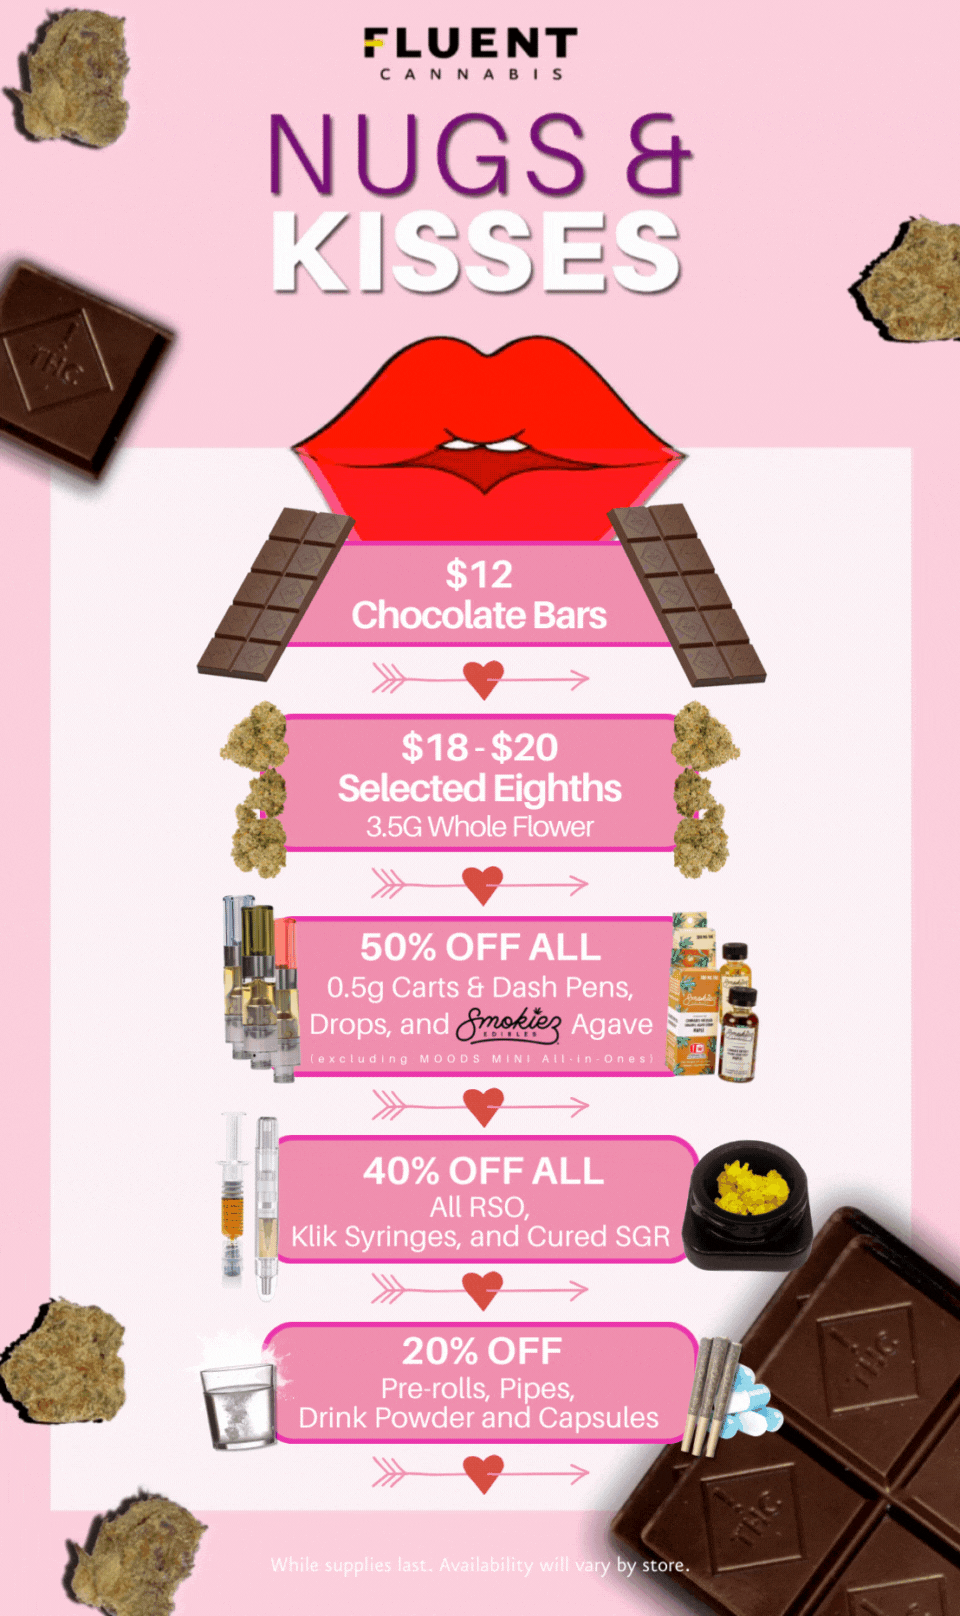 Feb%2012%20FL%20 Valentines%20Day Email.gif?width=1200&upscale=true&name=Feb%2012%20FL%20 Valentines%20Day Email